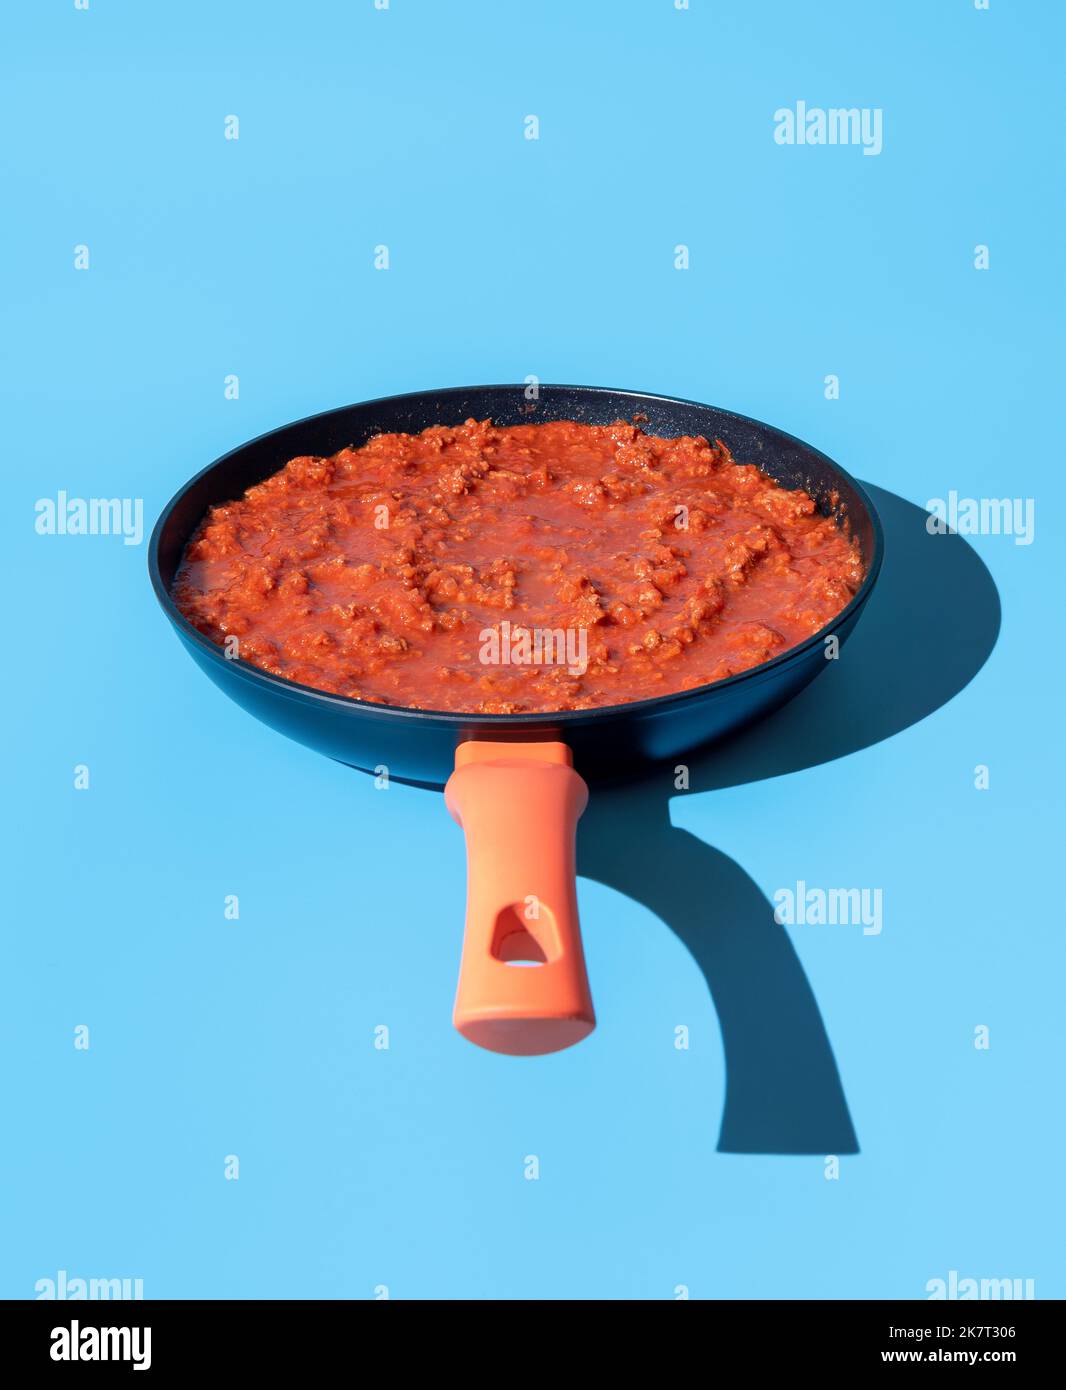 Pan with classic italian bolognese sauce minimalist on a blue table. Delicious ragu sauce pot in bright light on a vibrant-colored background. Stock Photo